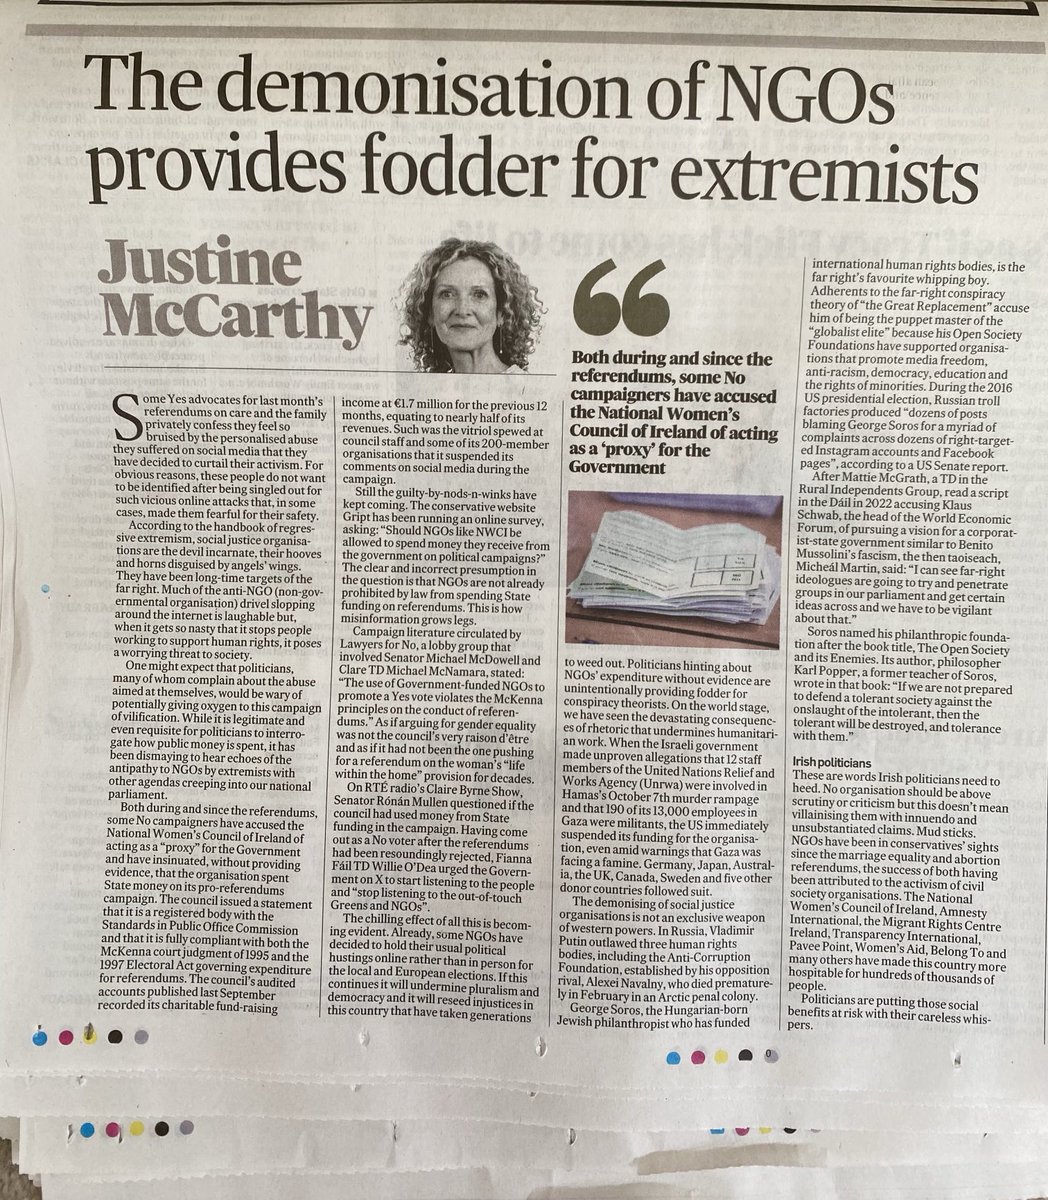 Justine McCarthy’s IT article highlights the dangers inherent in hints and innuendo about NGOs’ expenditure without evidence ⁦@NWCI⁩ ⁦@DublinRCC⁩ ⁦⁦@Womens_Aid⁩ ⁦@Saoirsewr17⁩ ⁦@FitzgeraldFrncs⁩ ⁦@HMcEntee⁩ ⁦@SimonHarrisTD⁩ ⁦